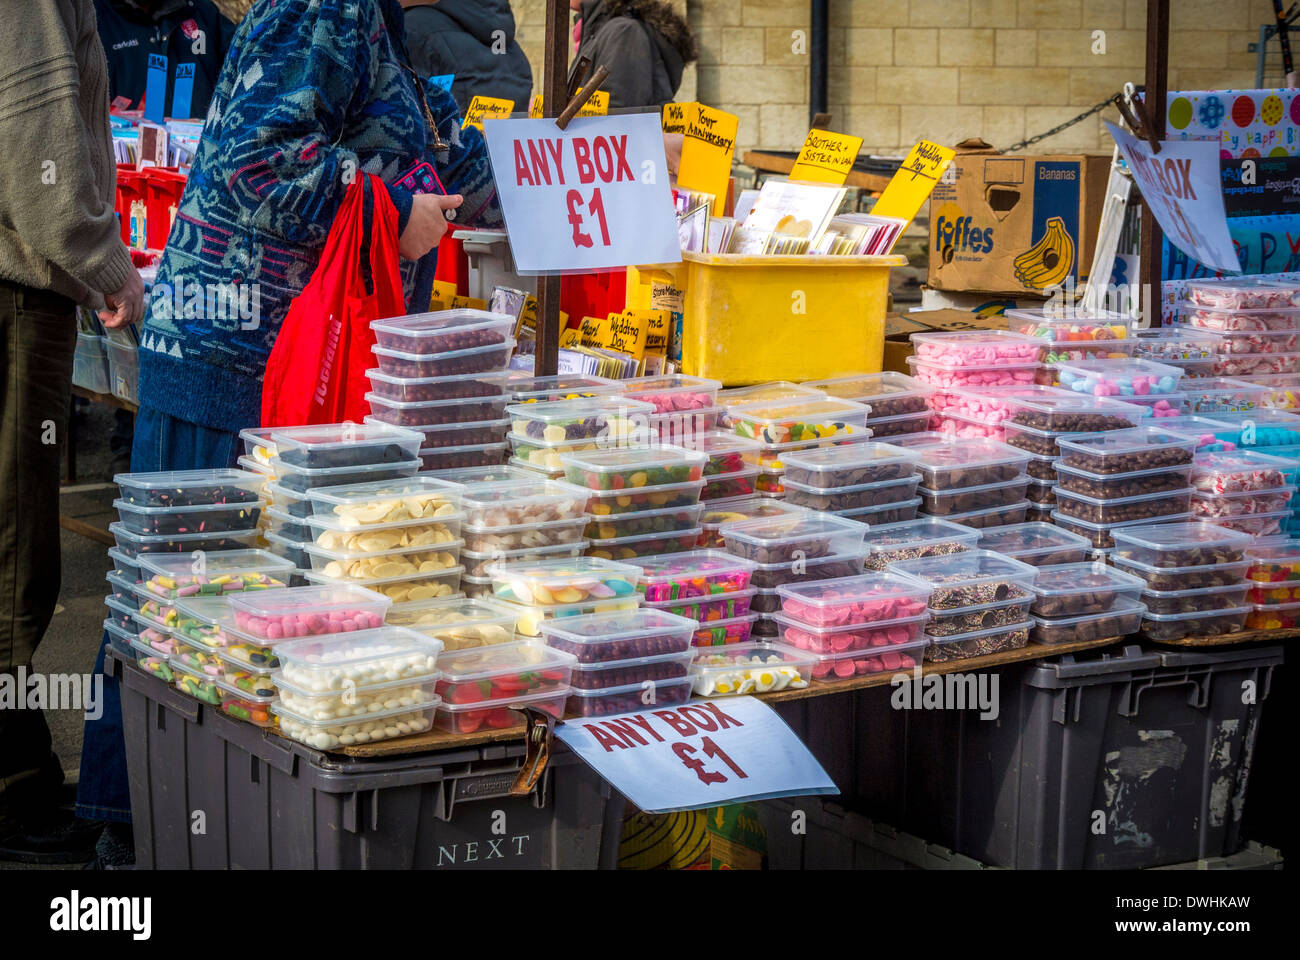 Sugary sweets available for sale at cheap prices on market stall leading to obesity and diabetes Stock Photo